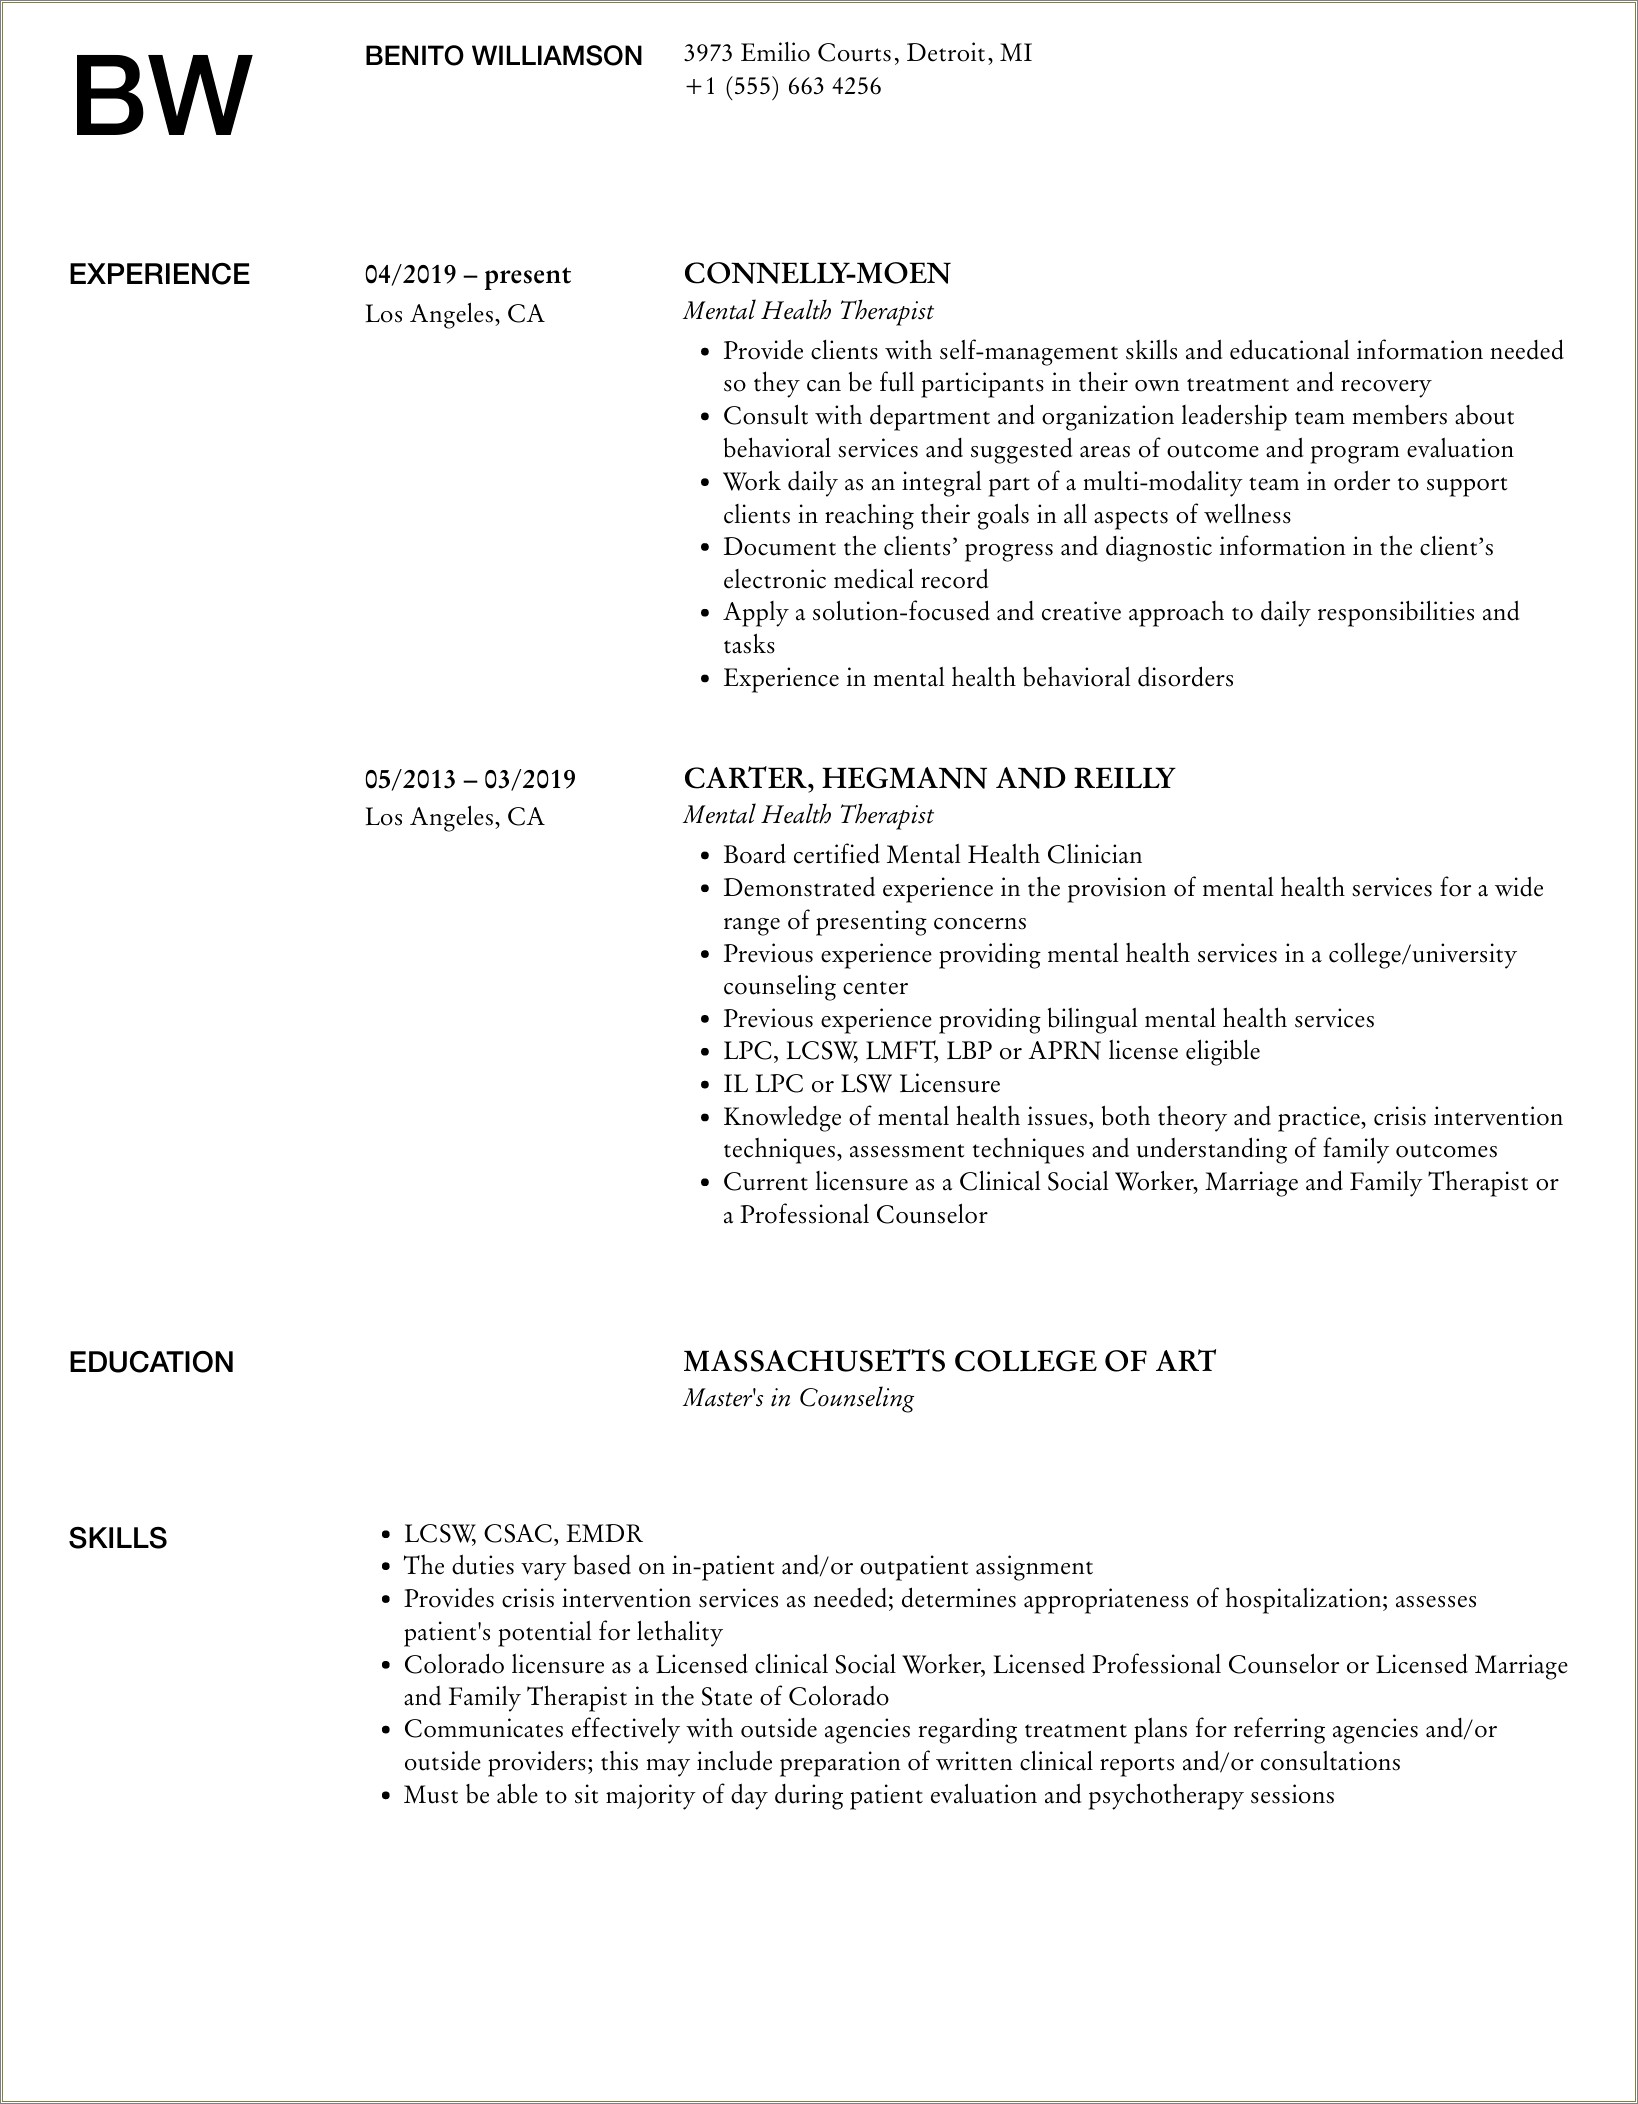 Counseing Skills To Include On Resume